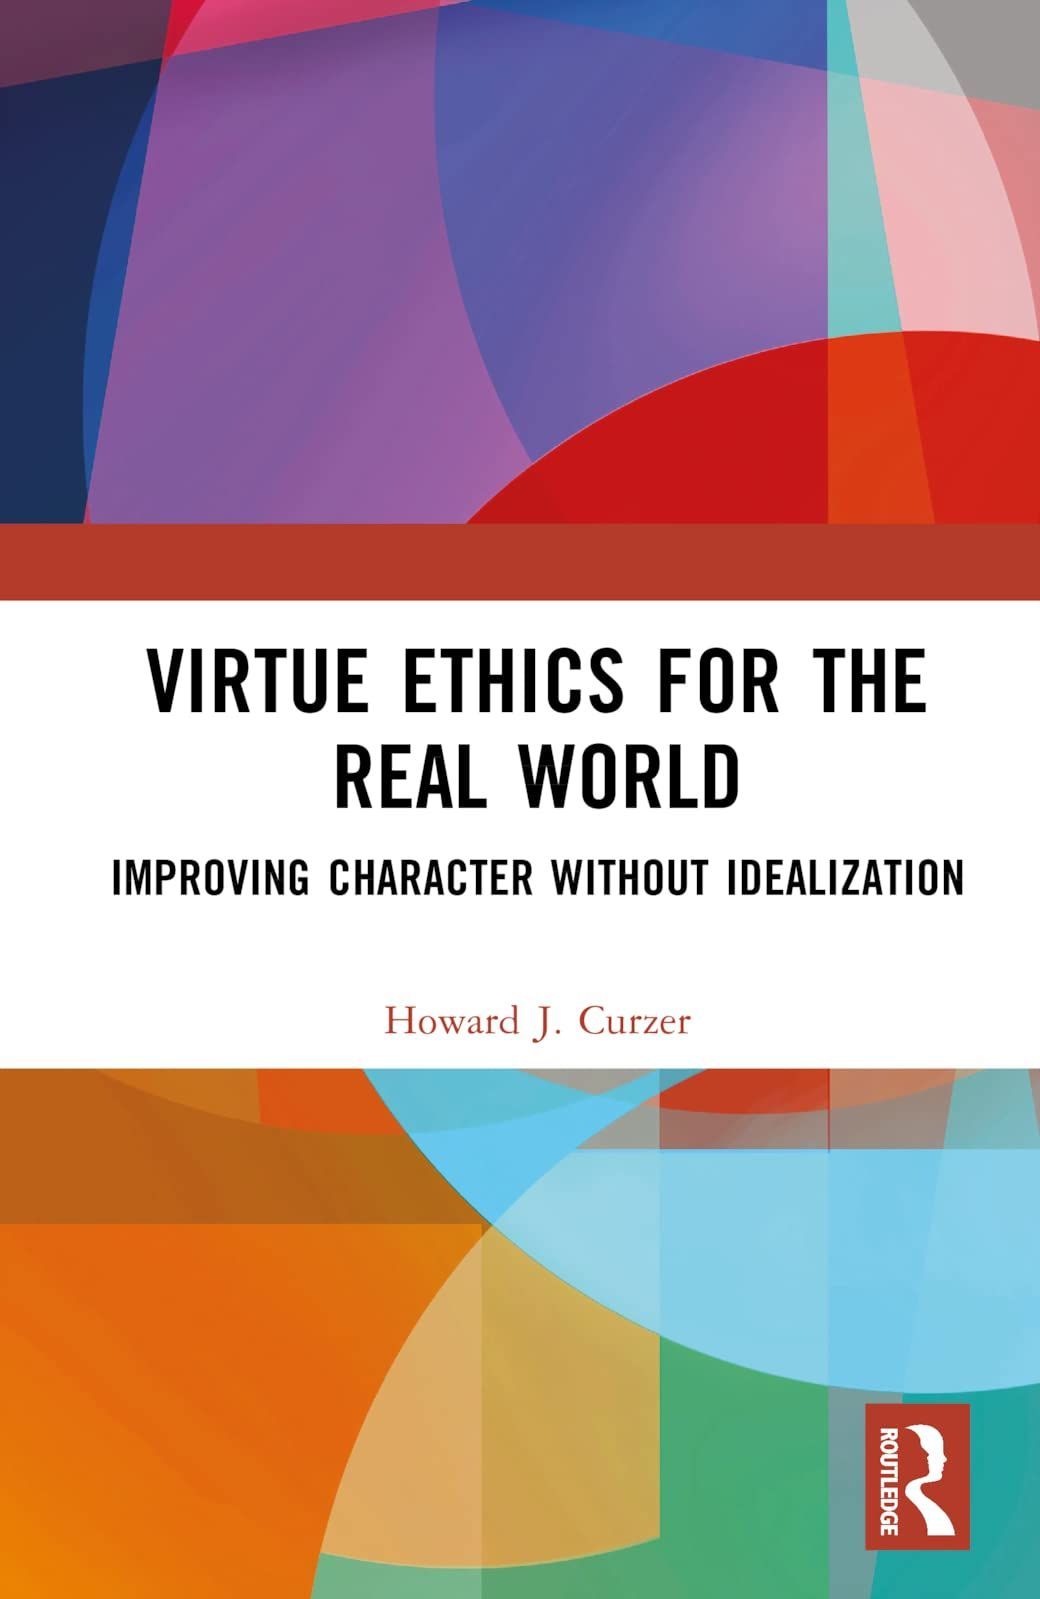 From the Right Action to Human Flourishing: On Howard J. Curzer’s “Virtue Ethics for the Real World”